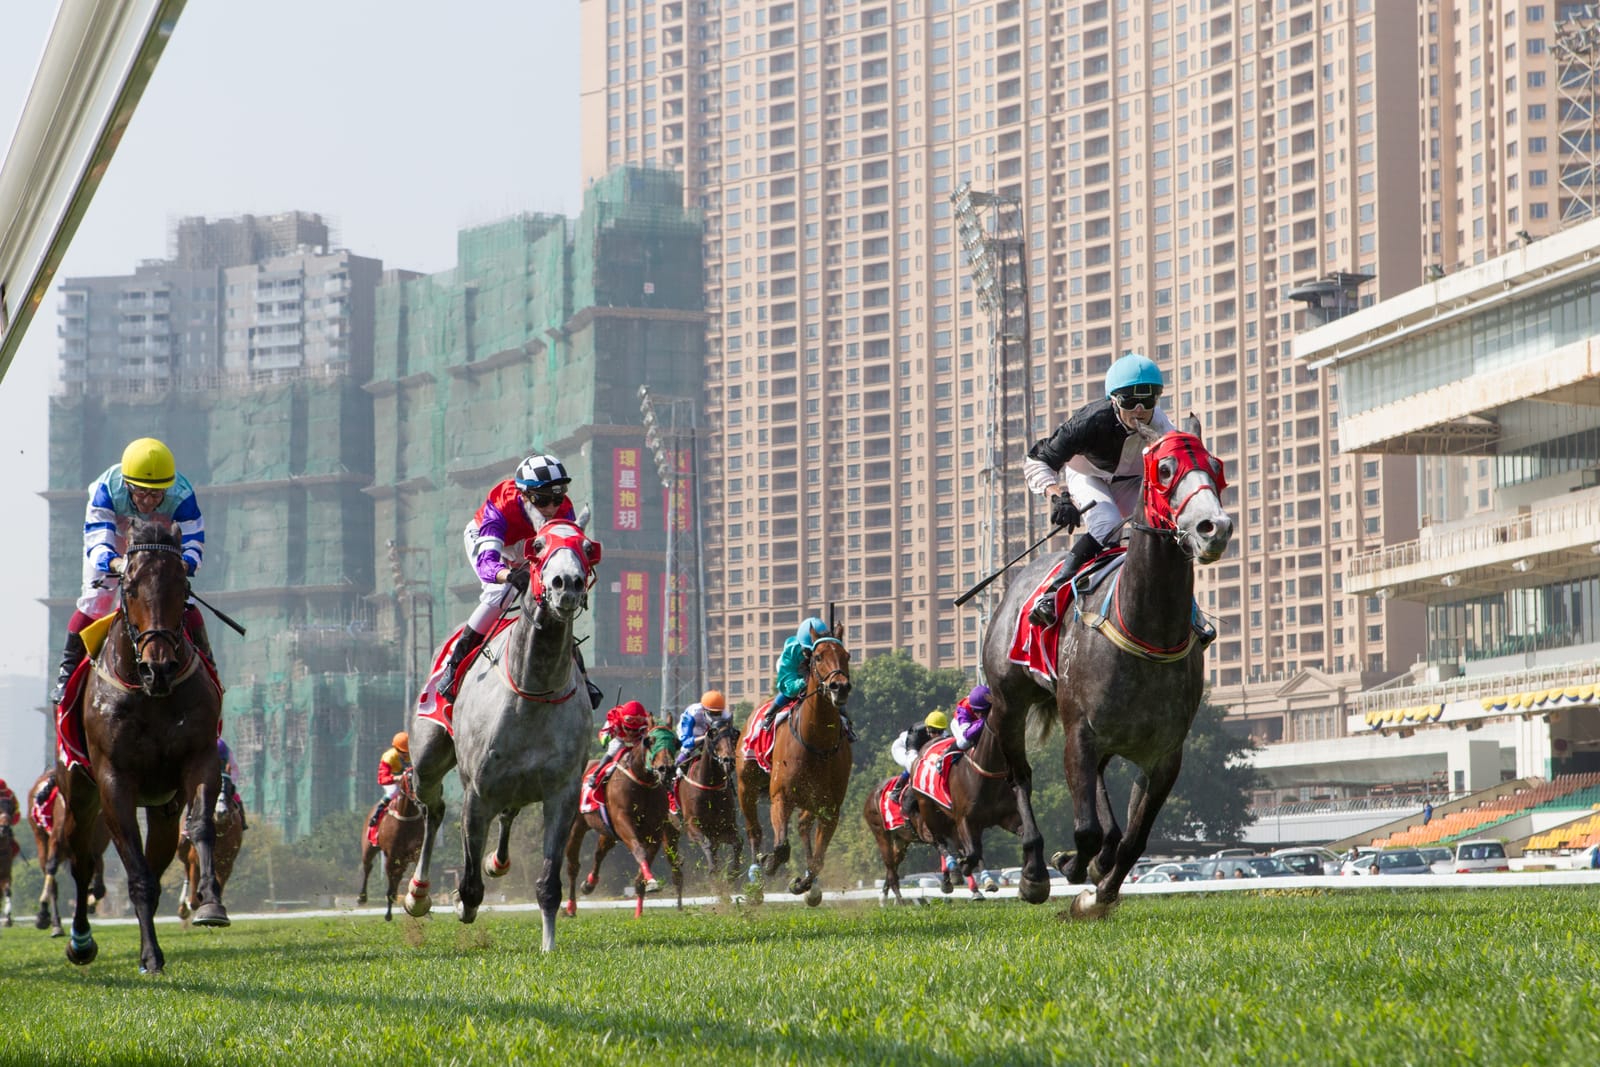 Macau government declares time on 'waning' thoroughbred racing industry